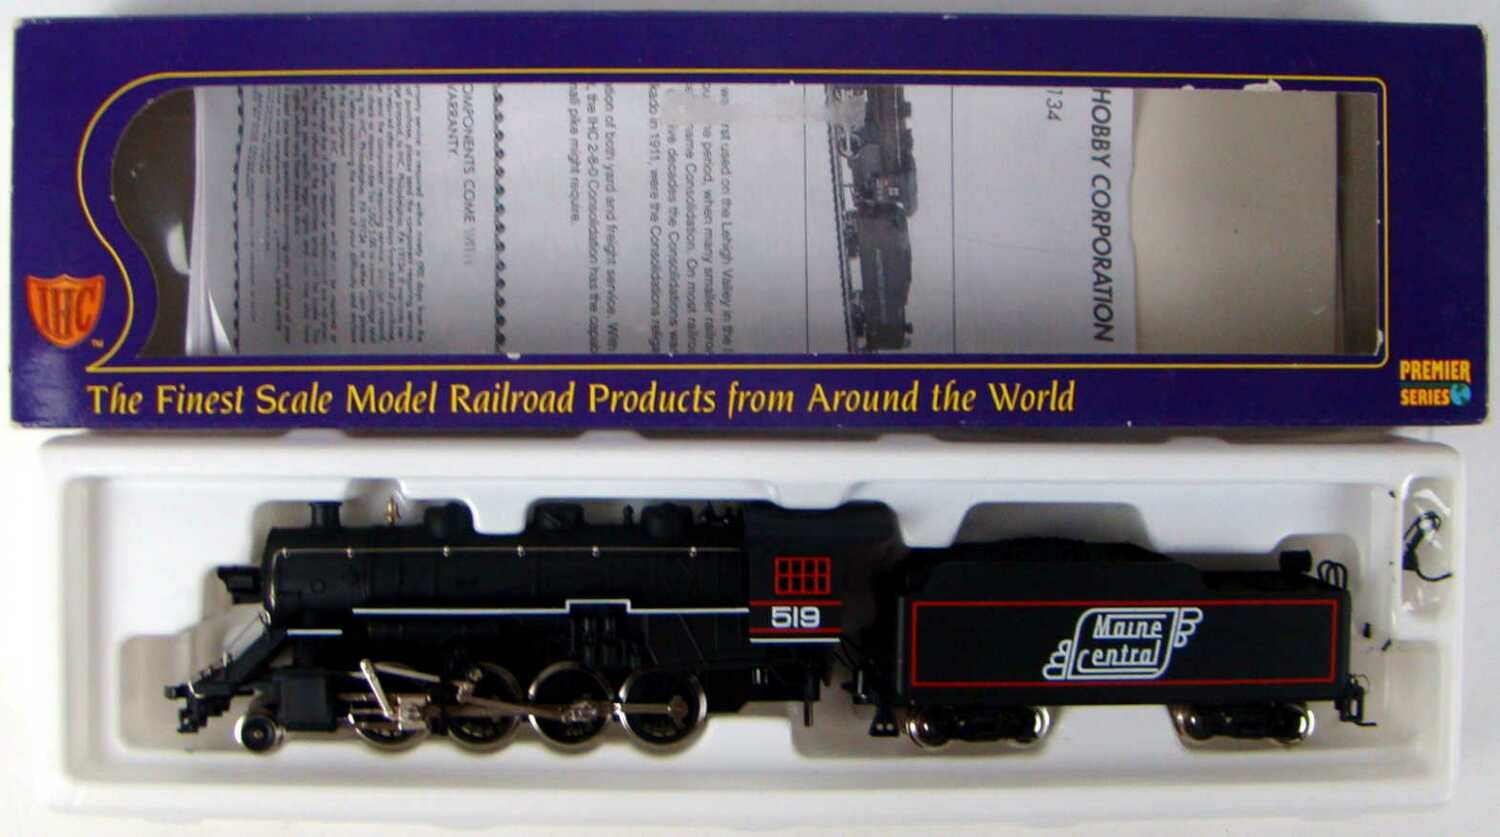 IHC M9522 Maine Central Class W-1 2-8-0 Consolidation Locomotive #519 HO Scale